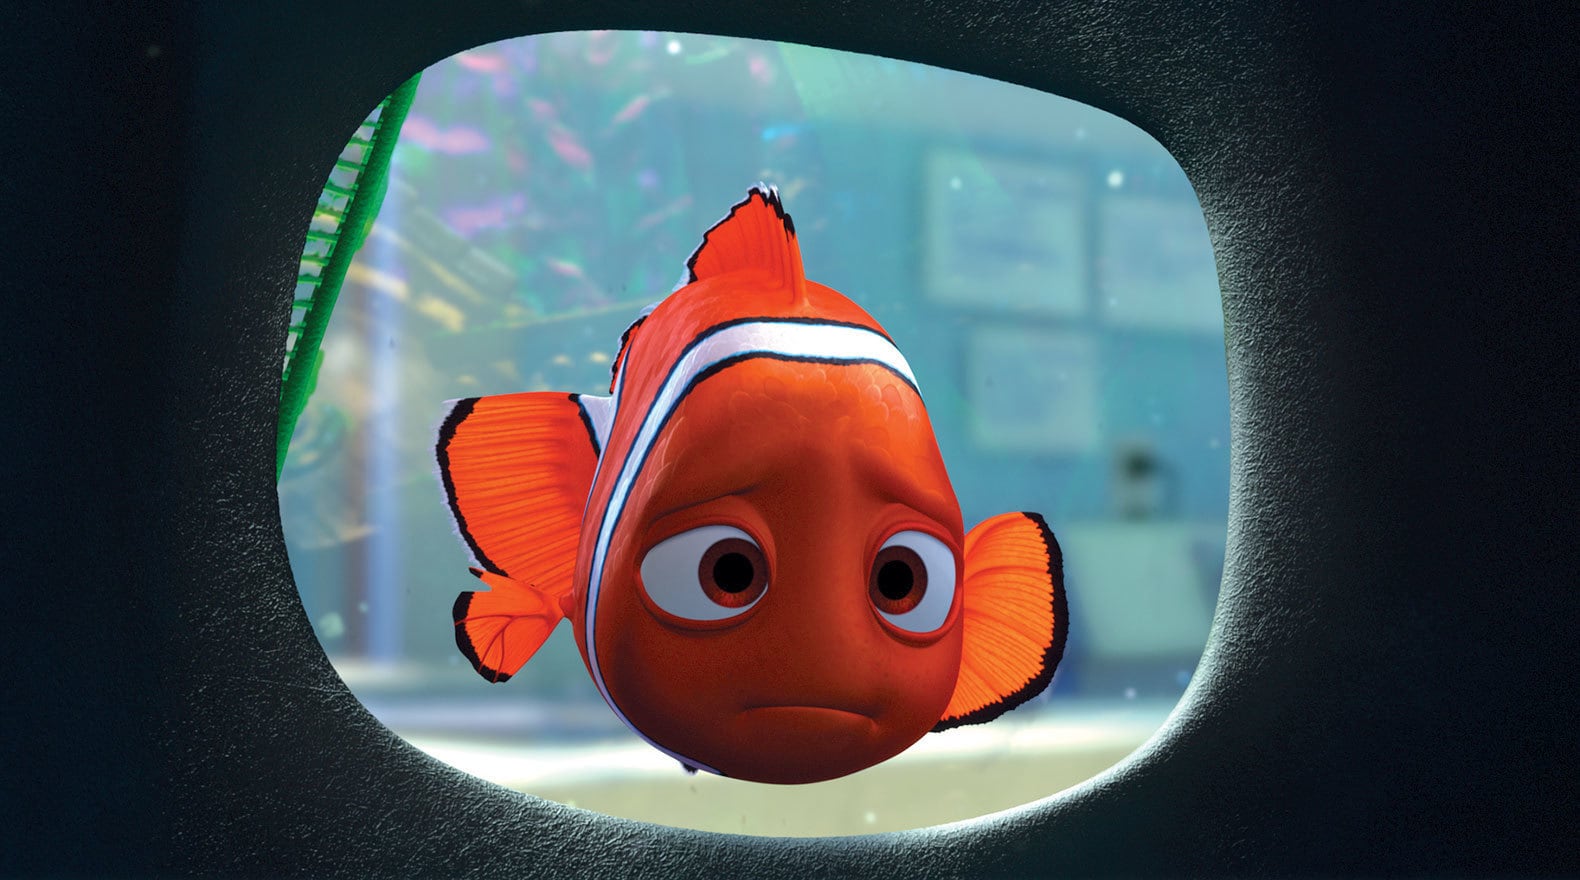 Movie science: Finding Nemo and the gender-swapping abilities of clownfish